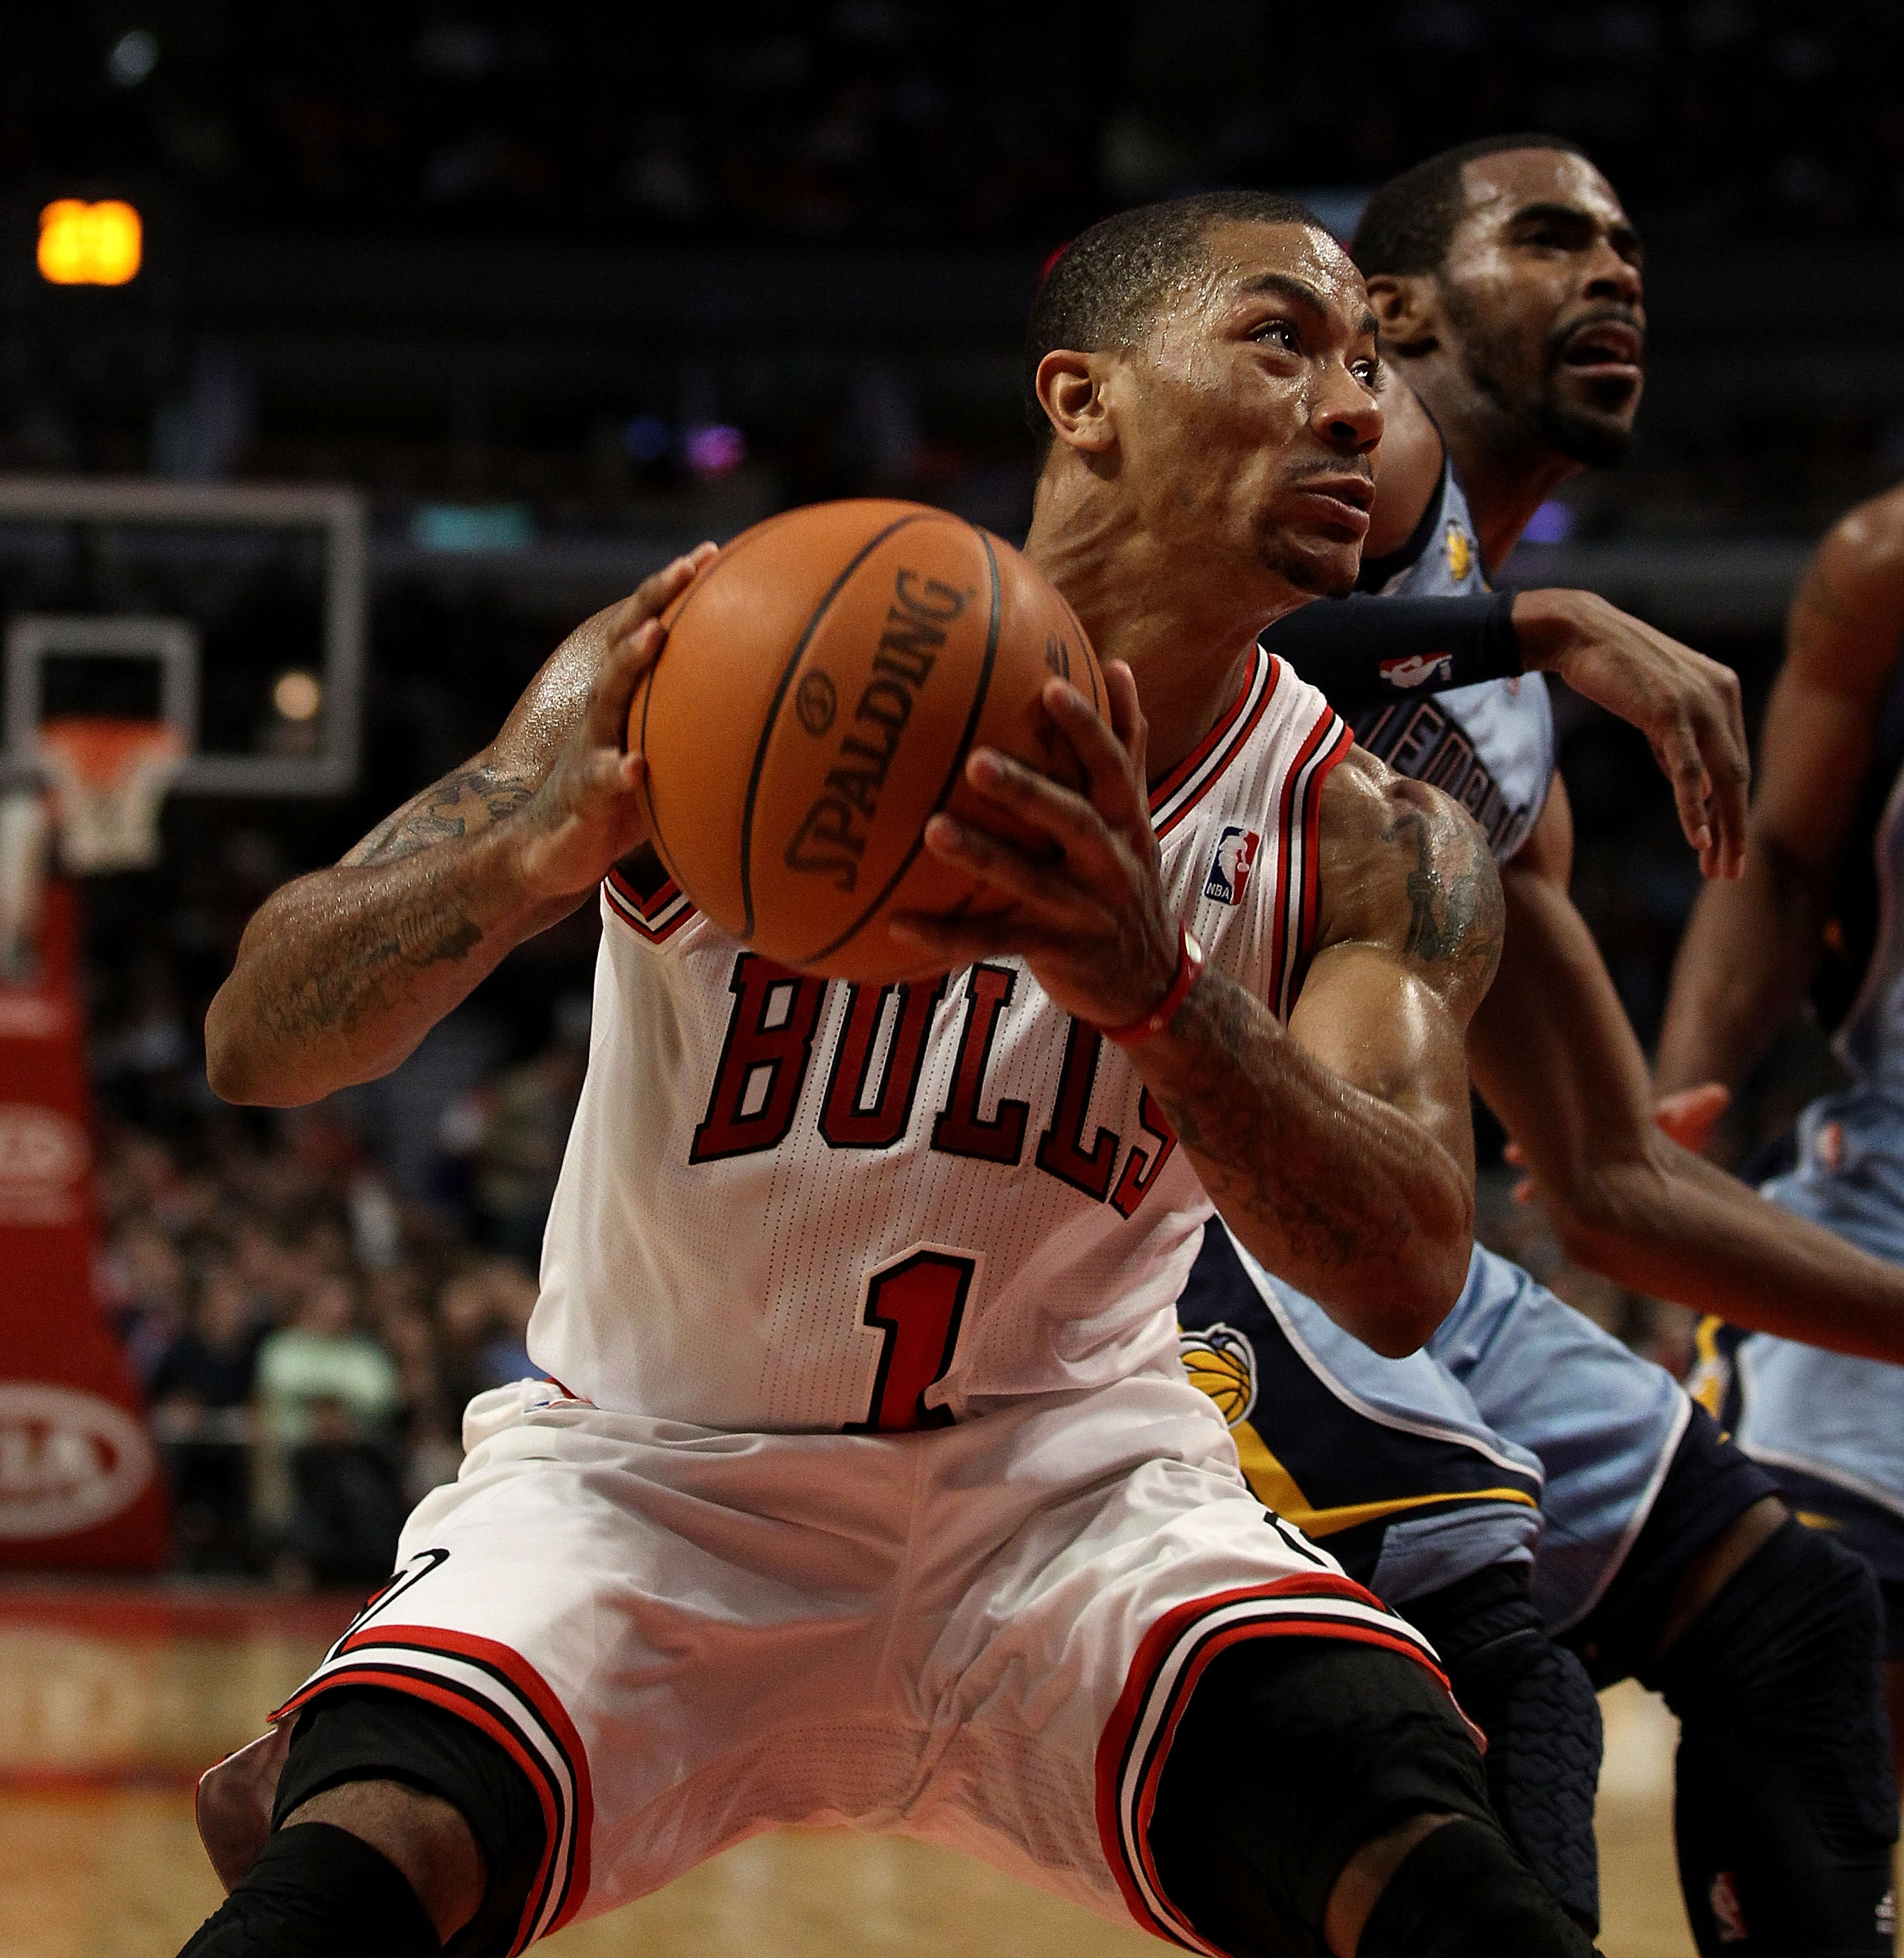 CHICAGO, IL - MARCH 25: Derrick Rose #1 of the Chicago Bulls drives against the Memphis Grizzlies at the United Center on March 25, 2011 in Chicago, Illinois. The Bulls defeated the Grizzlies 99-96. NOTE TO USER: User expressly acknowledges and agrees tha